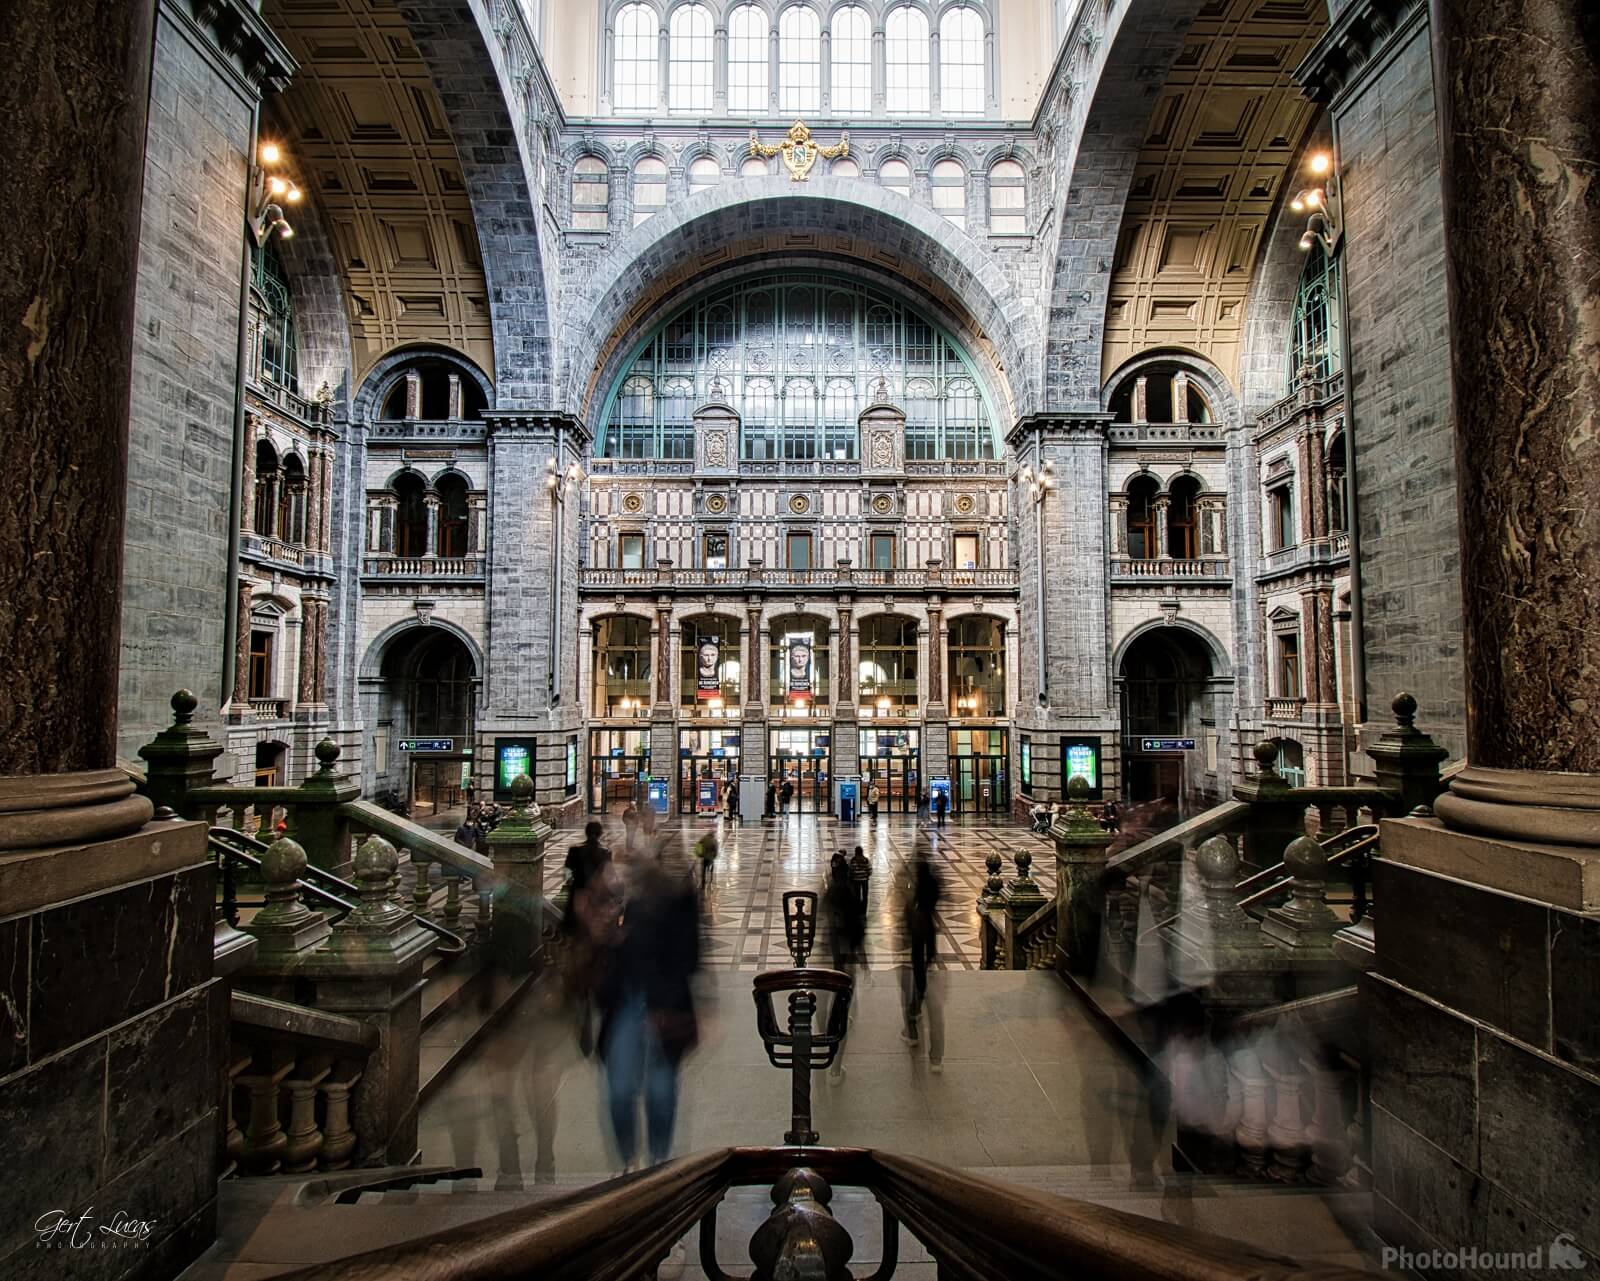 Image of Antwerpen Centraal Train Station - Main Lobby by Gert Lucas